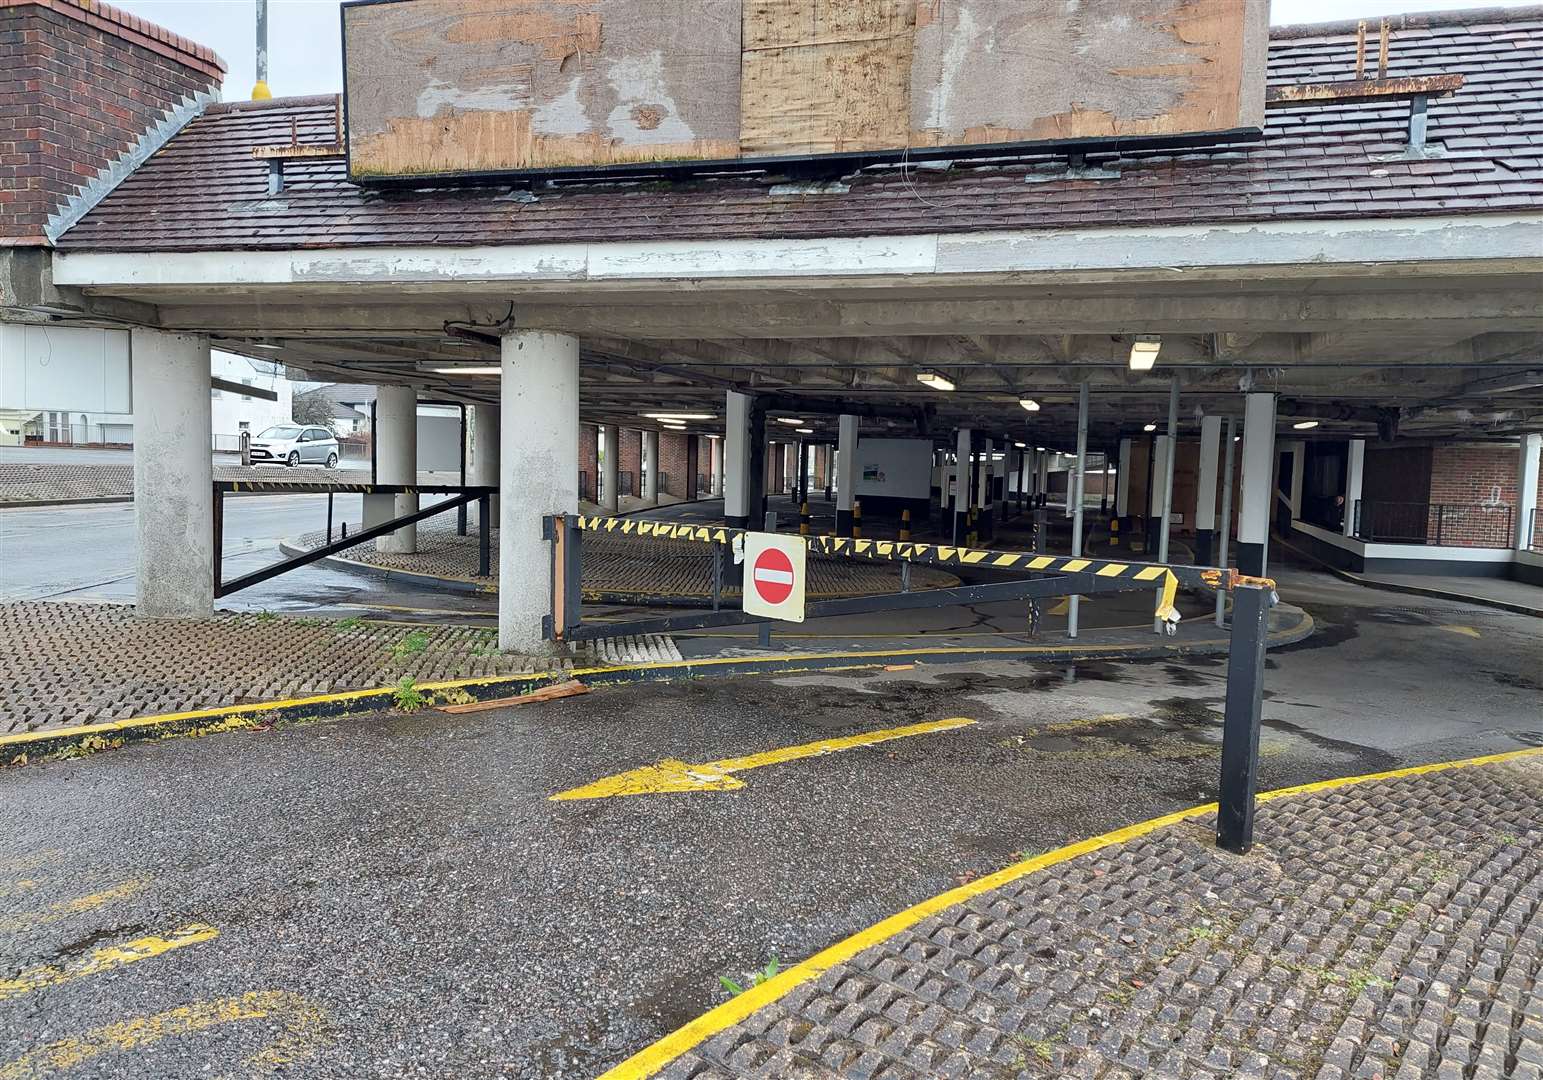 Park Mall car park in Ashford reopened in June after two months of repairs